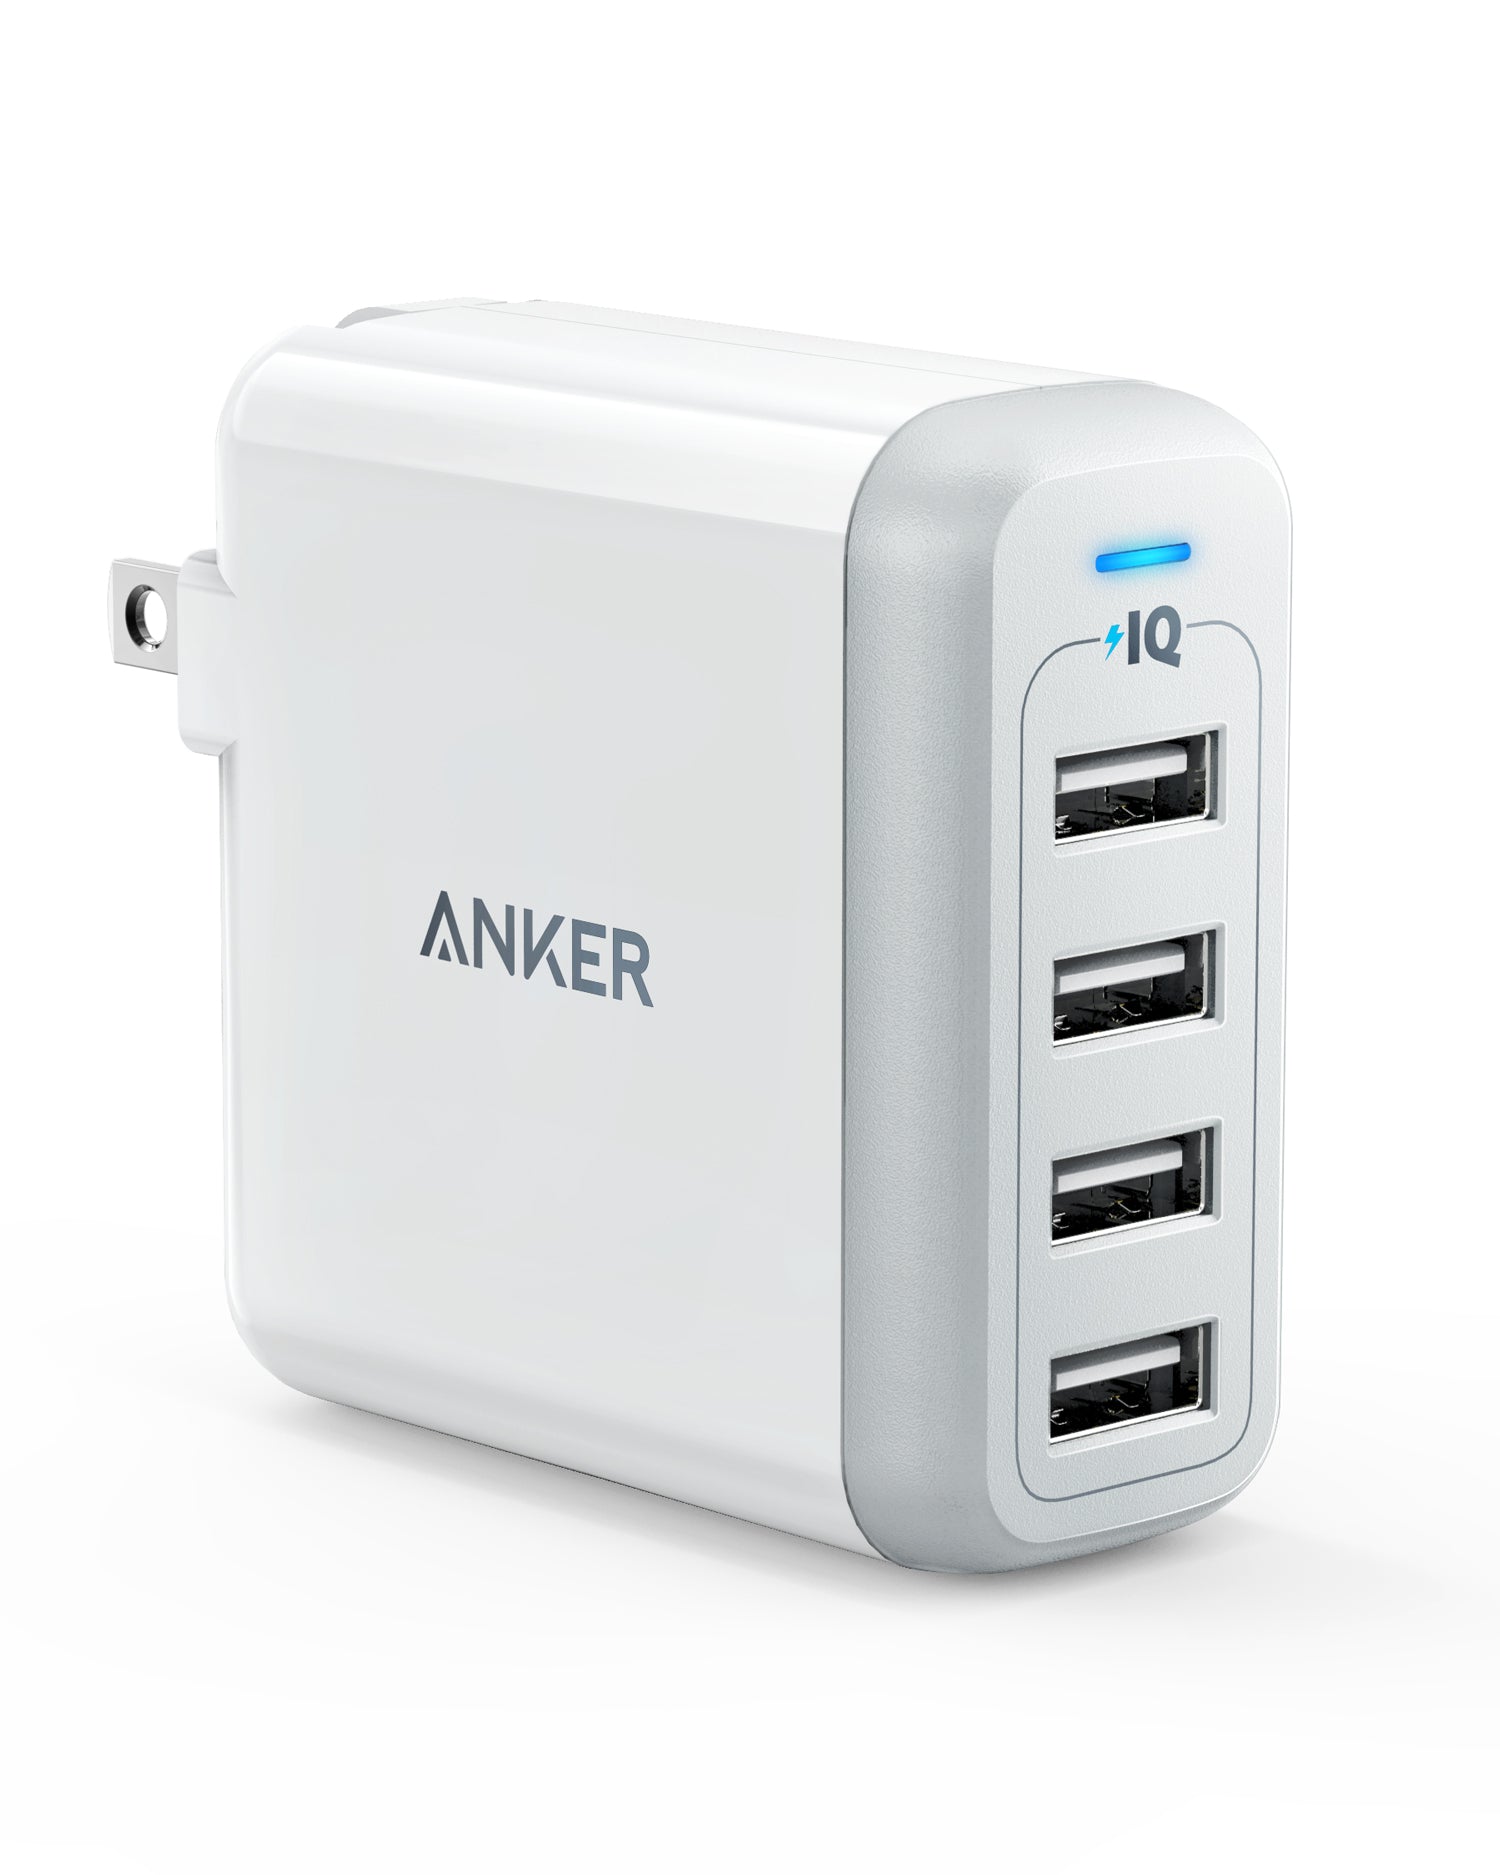 Anker GaNPrime Chargers: Features, Pricing, & How to Buy - TheStreet